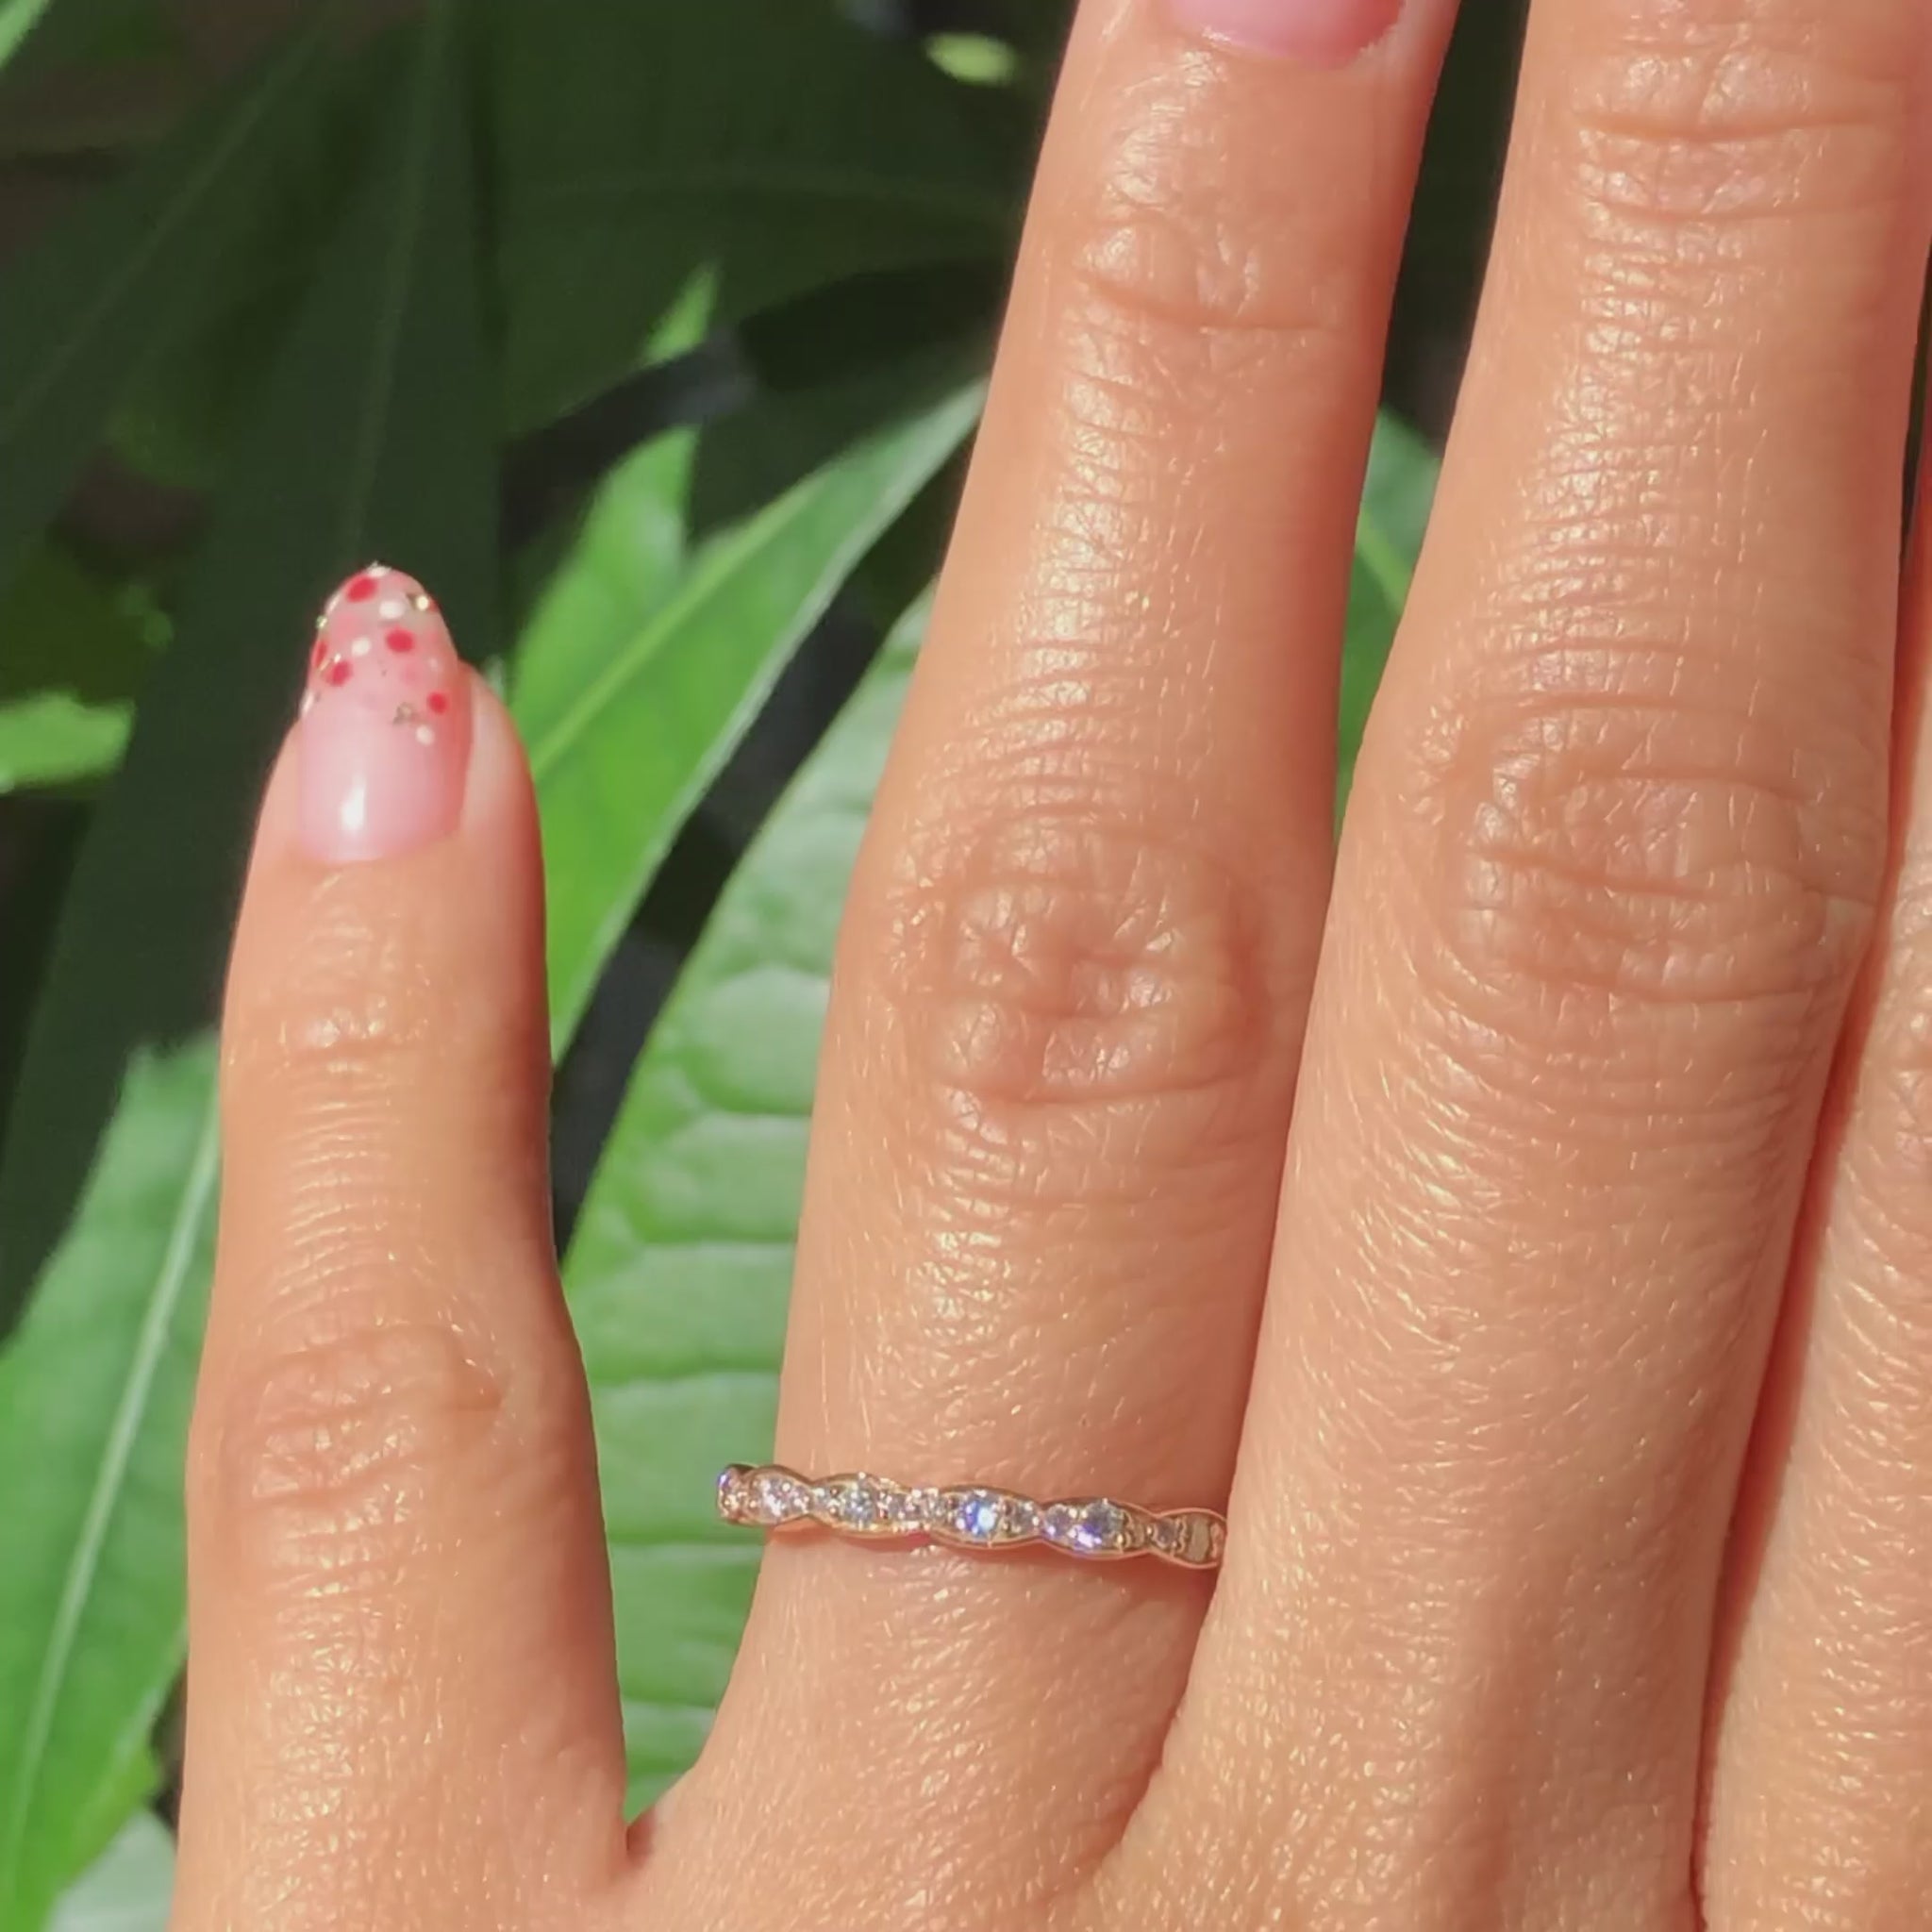 oval aquamarine engagement ring in rose gold vintage inspired band by la more designHalf diamond wedding ring rose gold scalloped band la more design jewelry